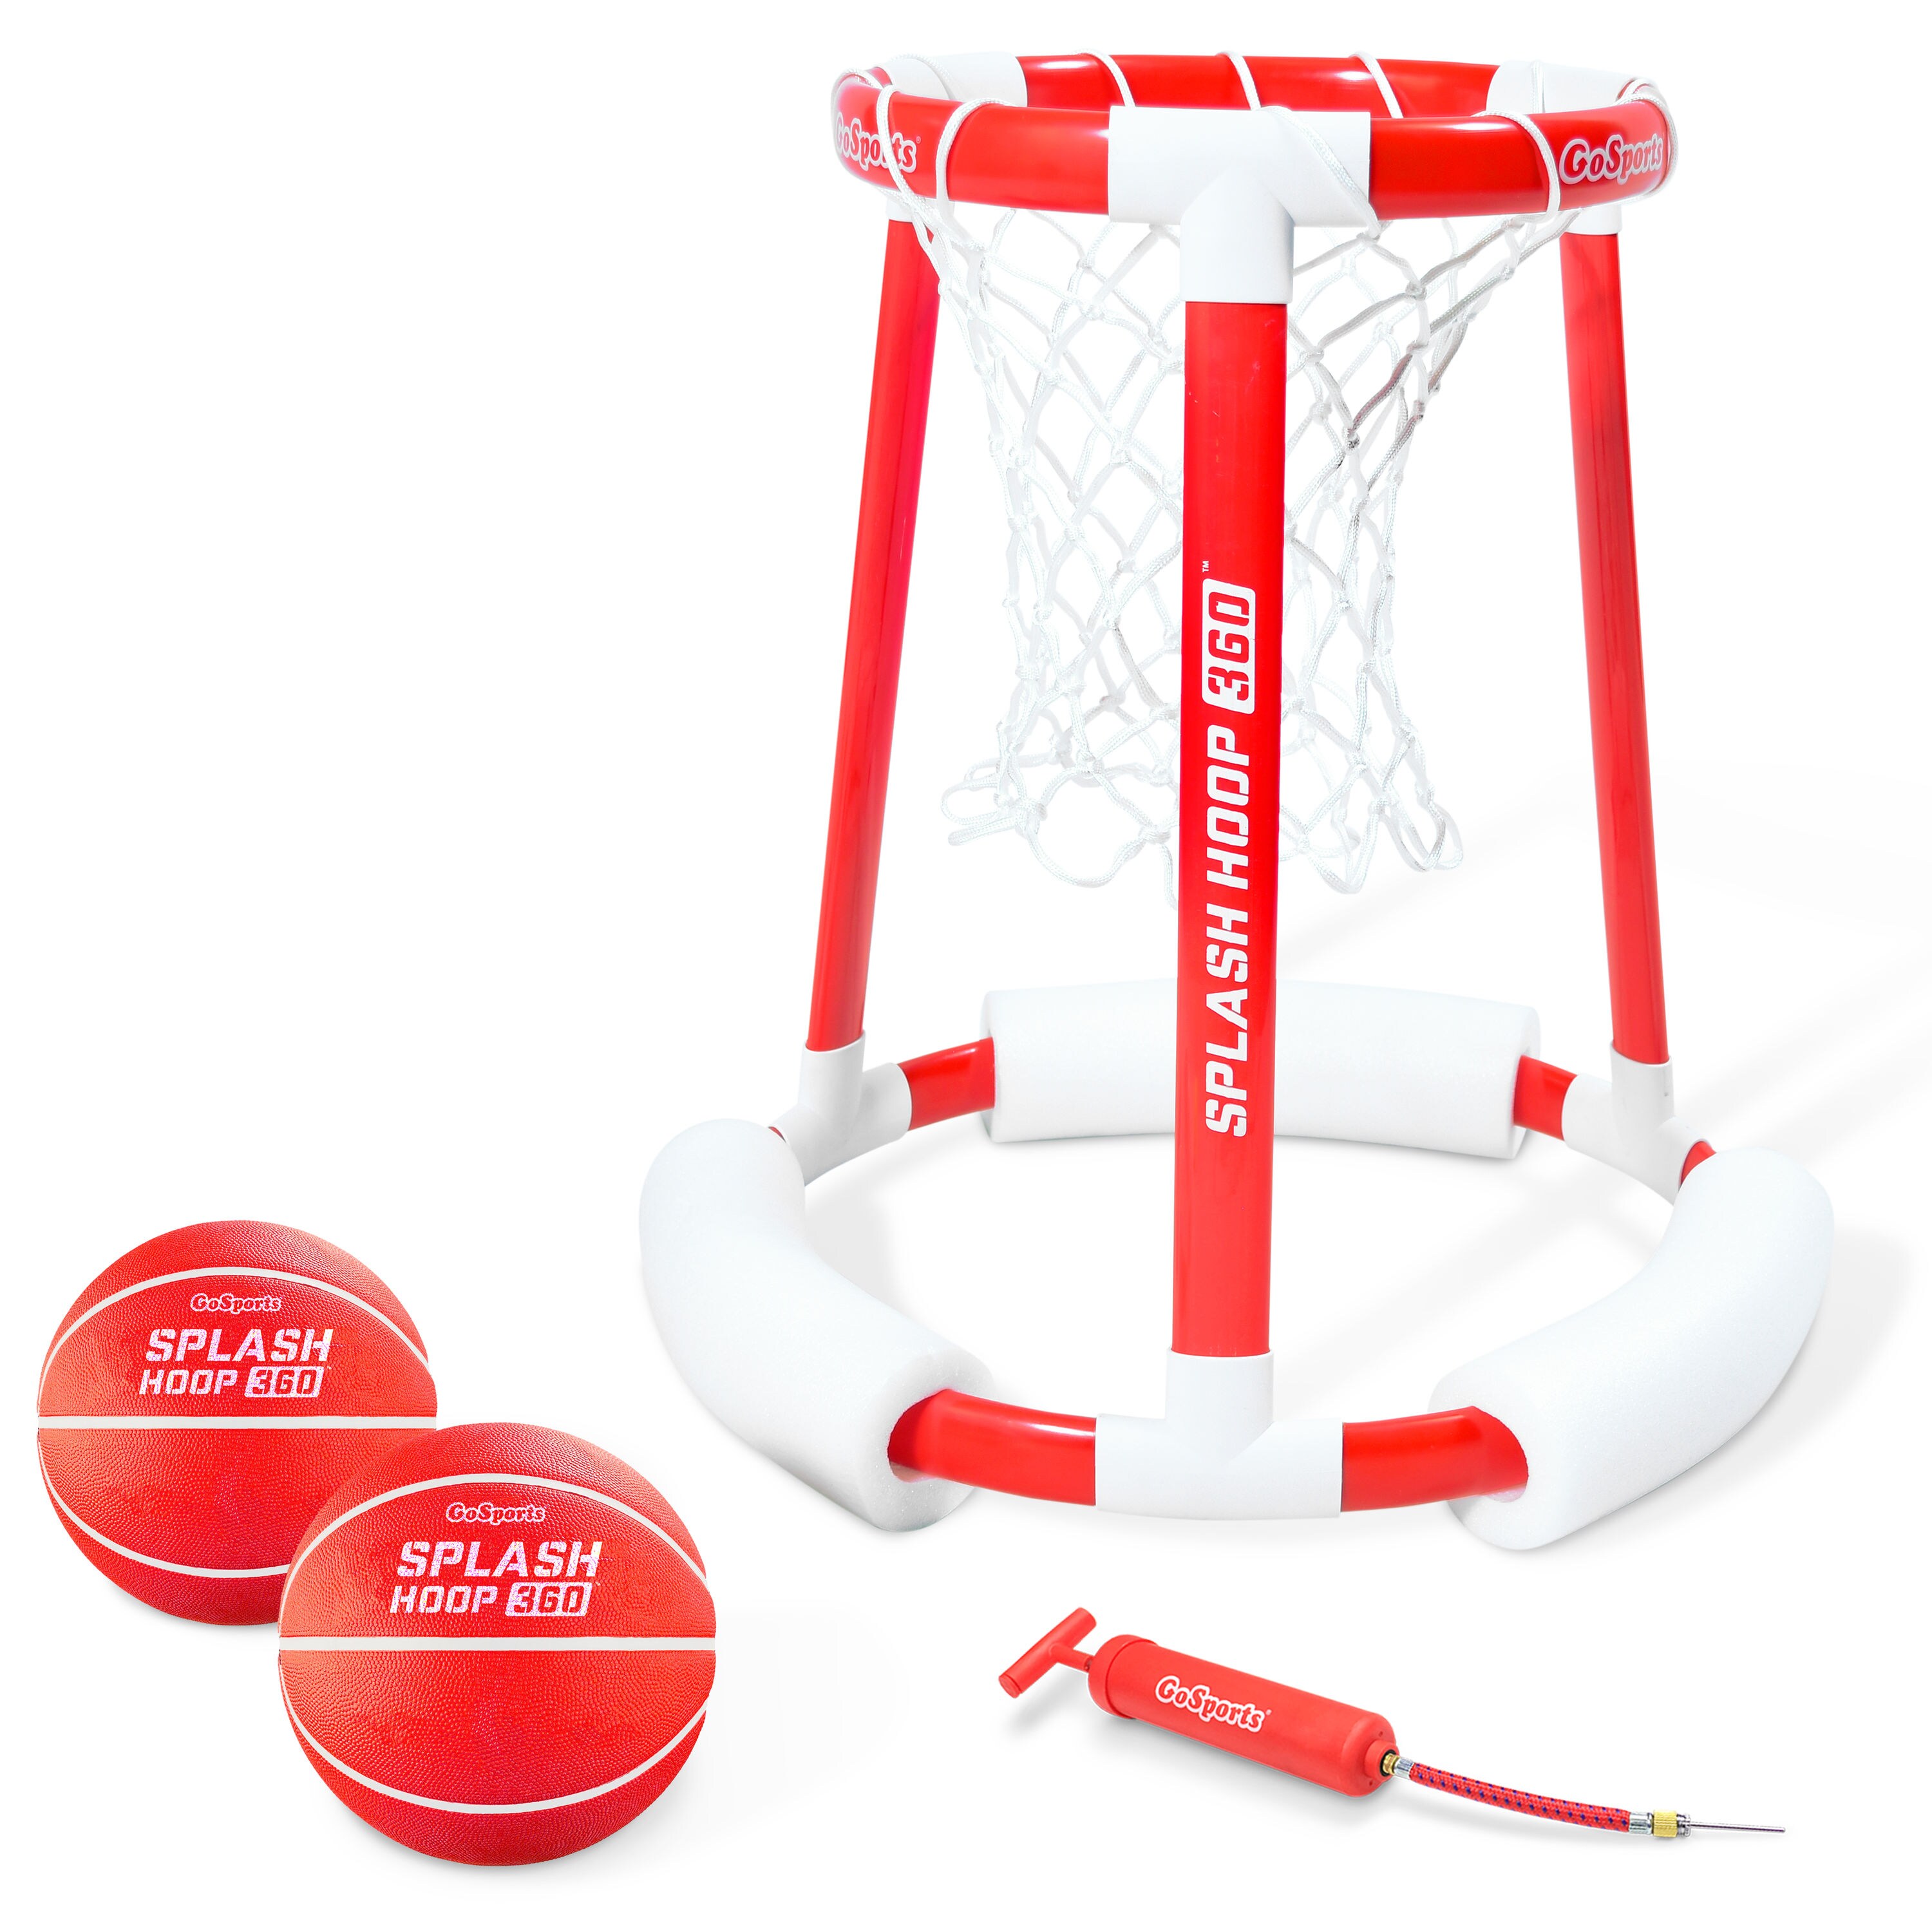 GoSports Water Basketball 2 PackMake a Splash at Your Next Pool Party!